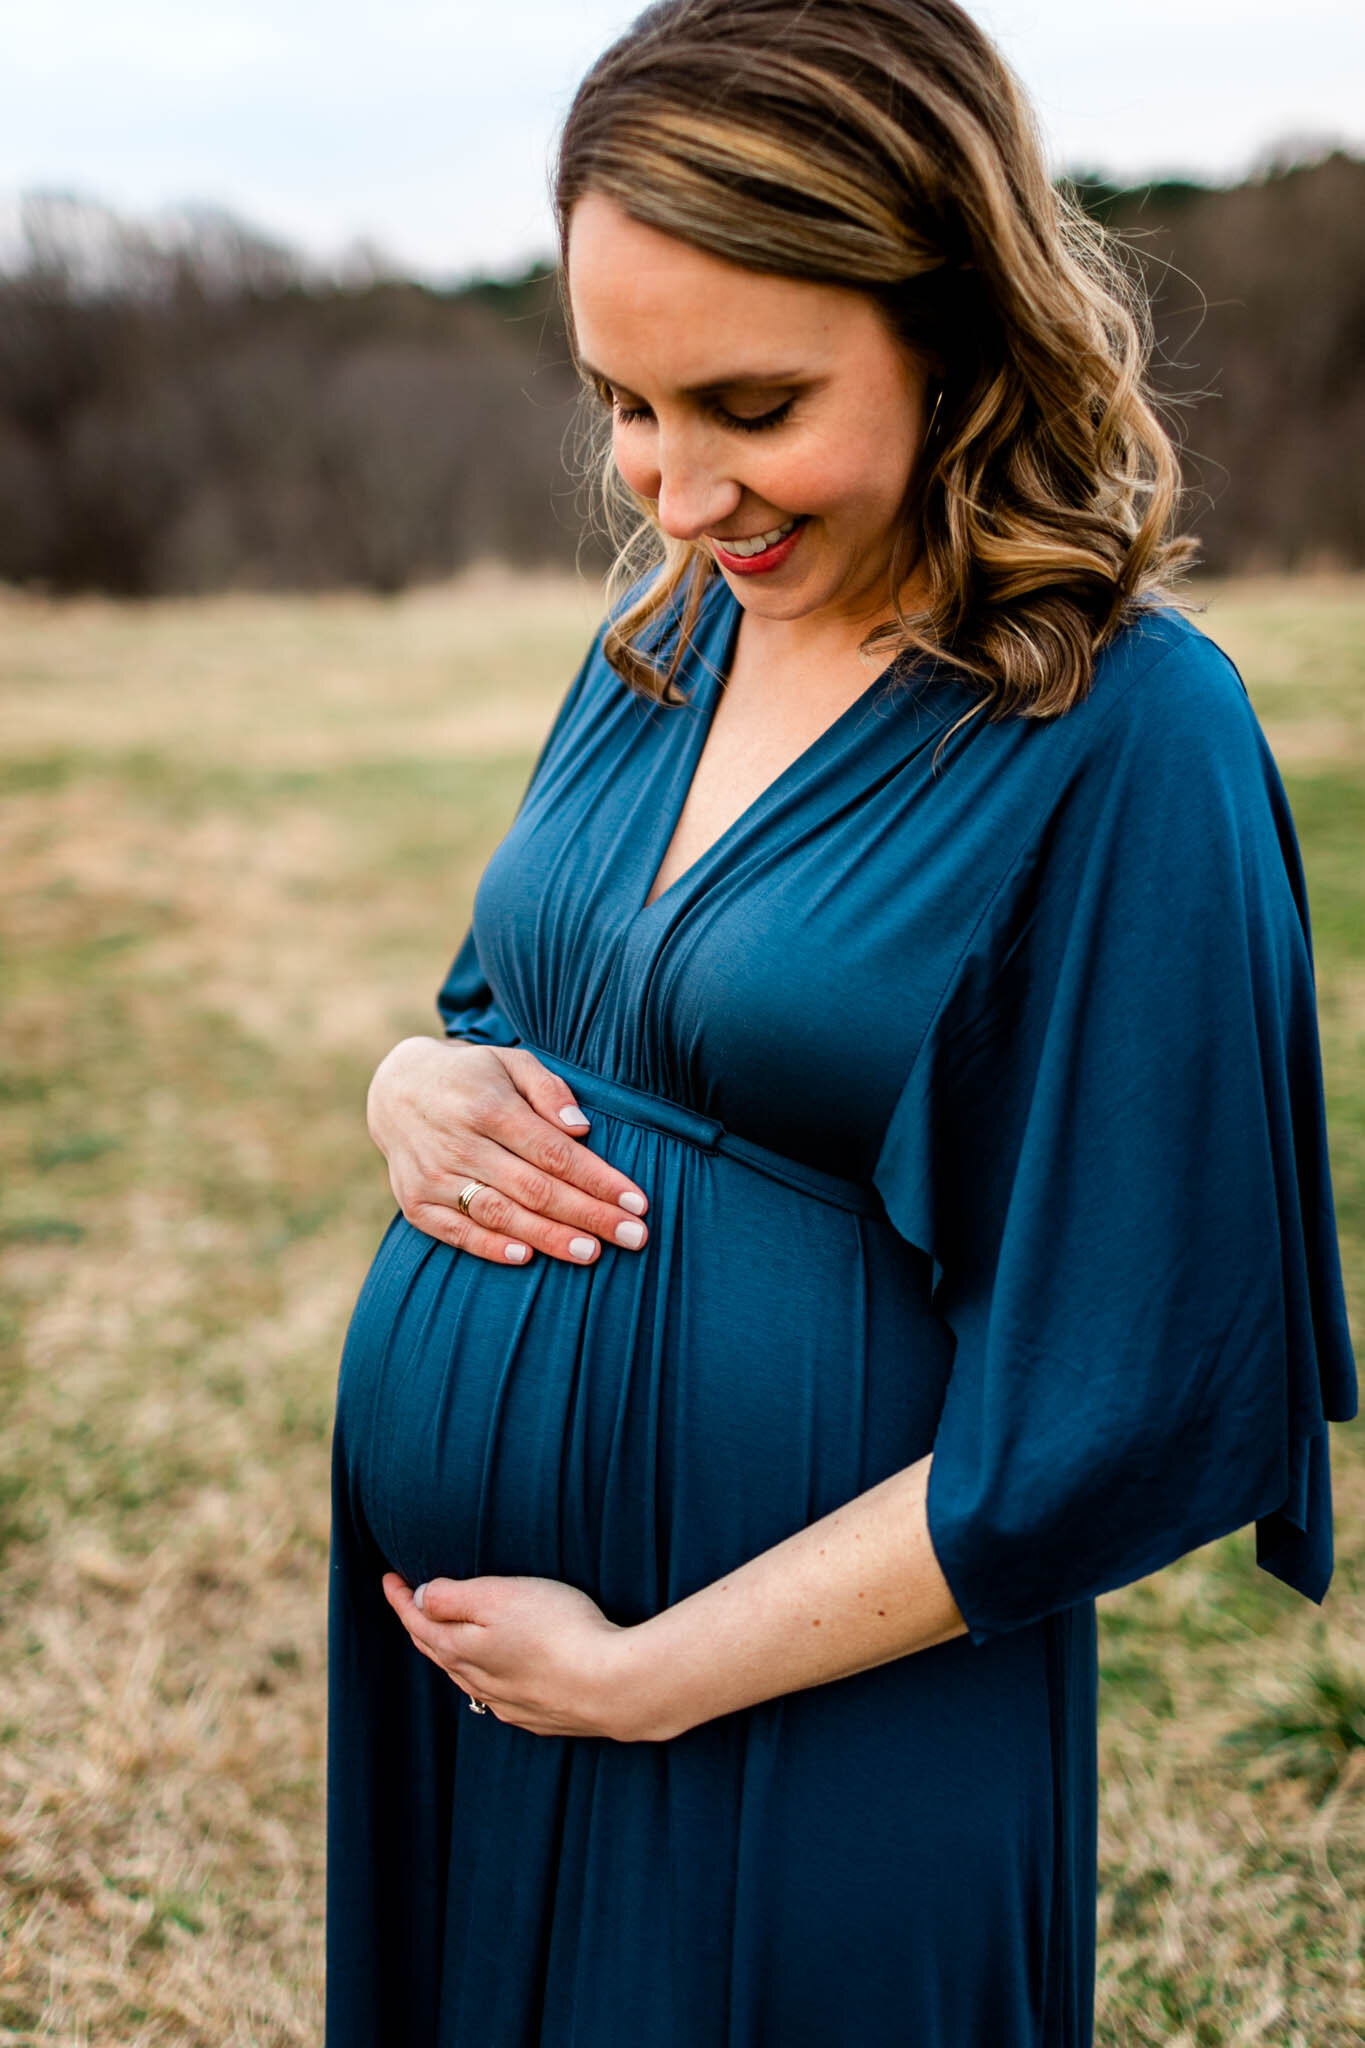 Raleigh Newborn Photographer | By G. Lin Photography | Woman smiling and looking down at baby bump